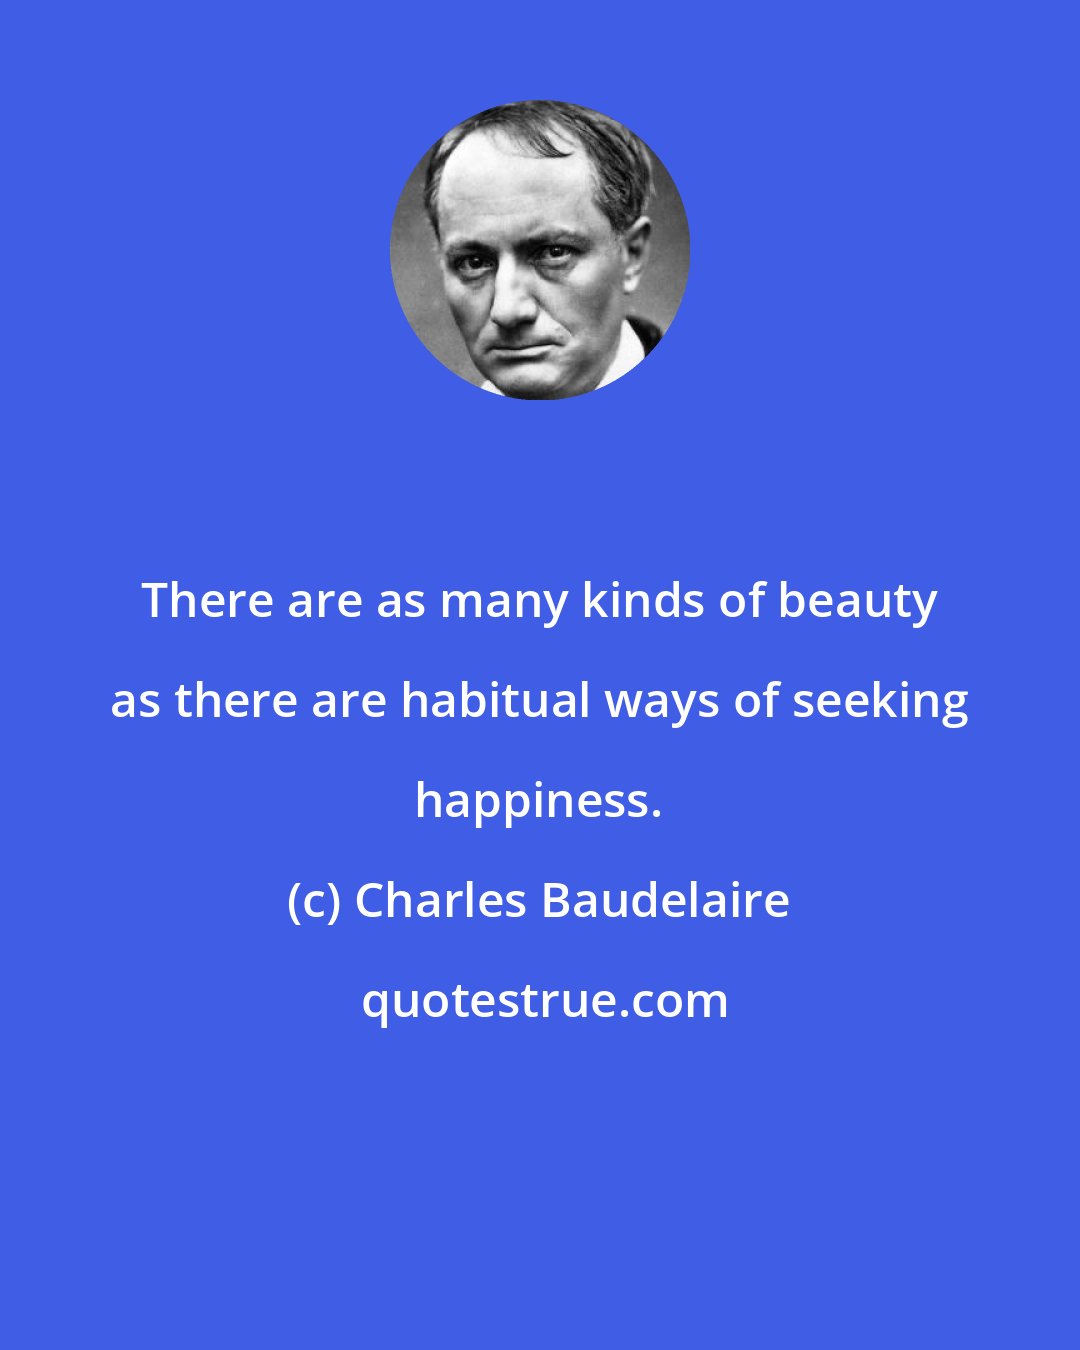 Charles Baudelaire: There are as many kinds of beauty as there are habitual ways of seeking happiness.